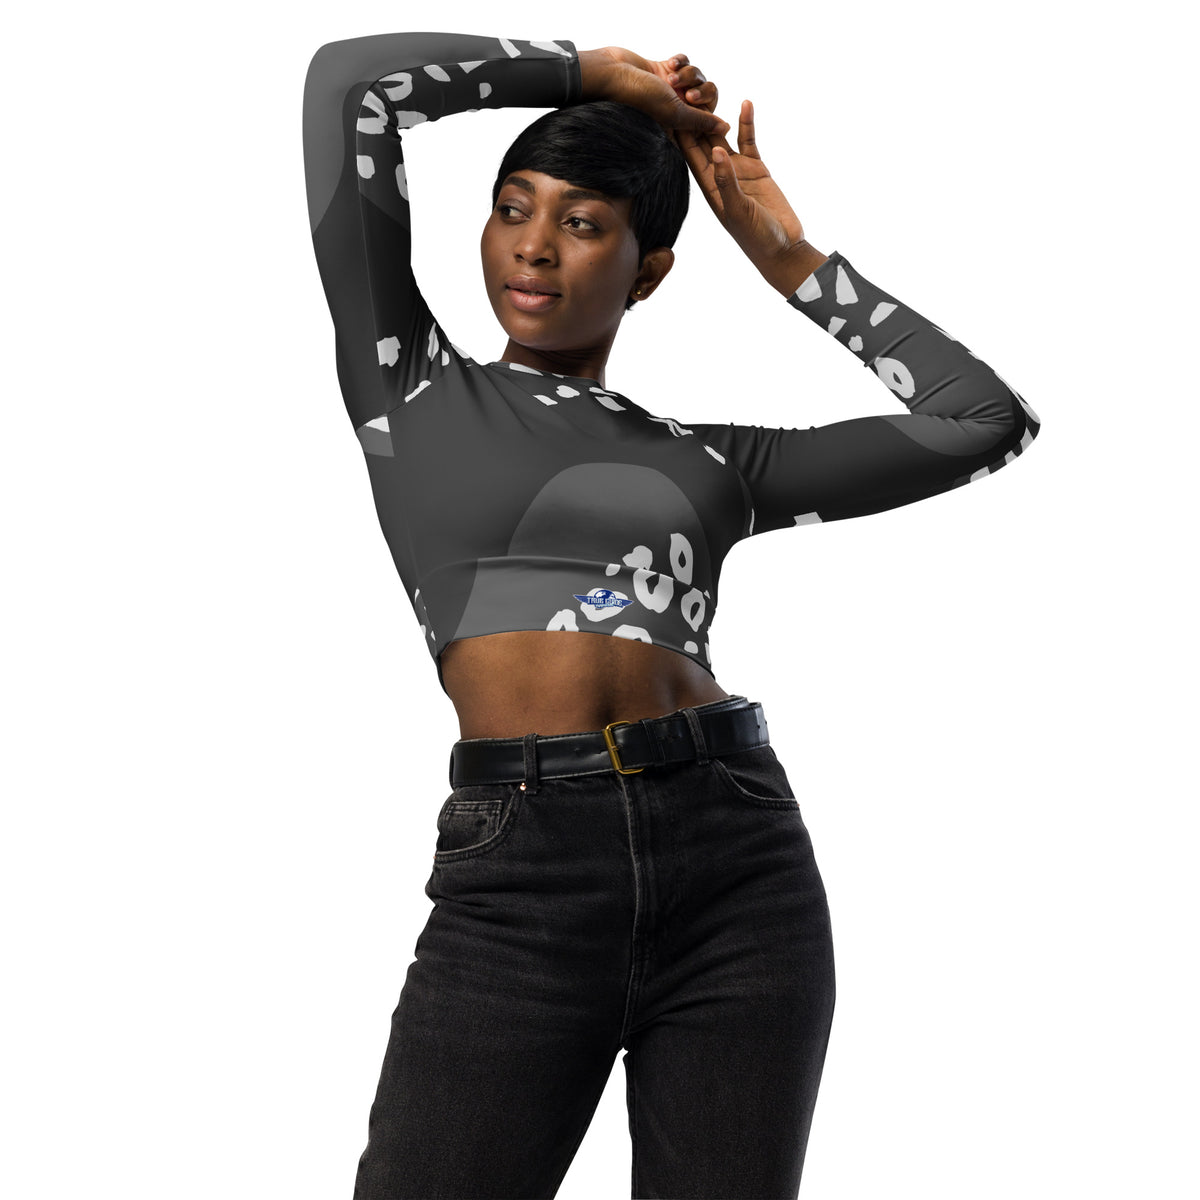 Dark Grey Spotted Clouds Recycled Long-Sleeve Crop Top